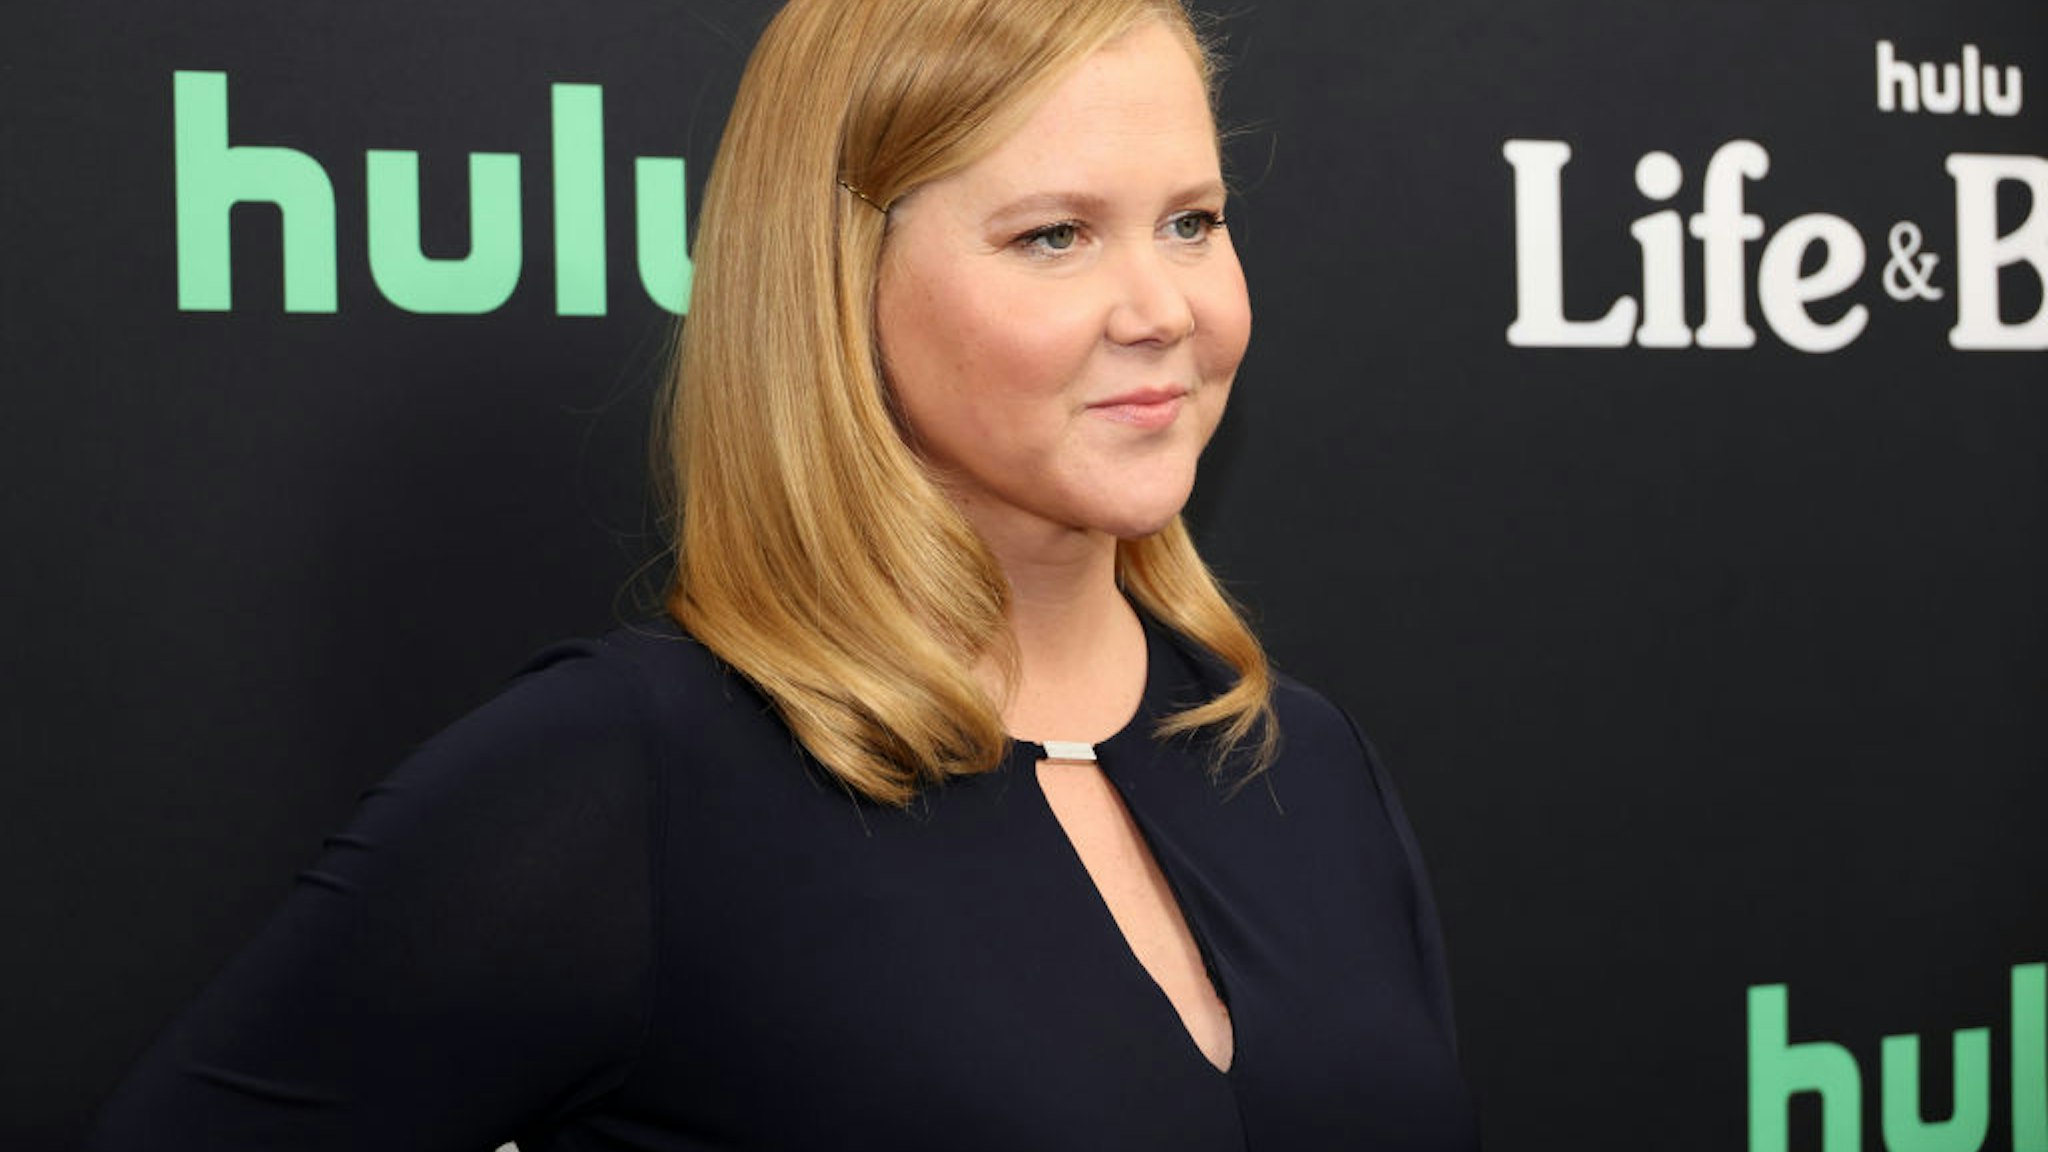 NEW YORK, NEW YORK - MARCH 16: Amy Schumer attends Hulu's "Life &amp; Beth" New York Premiere at SVA Theater on March 16, 2022 in New York City. (Photo by Cindy Ord/WireImage)